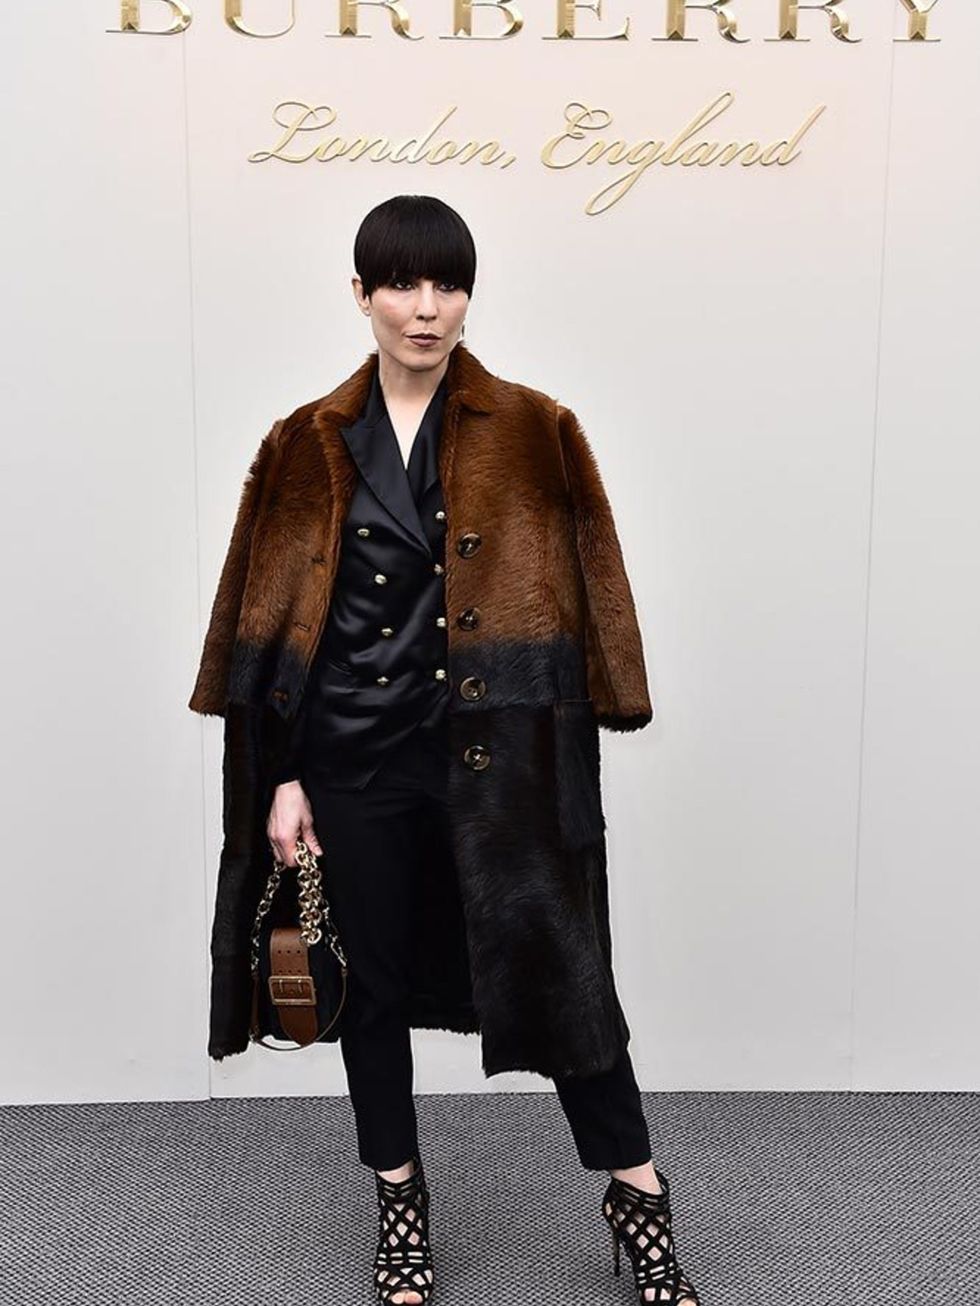 Noomi Rapace at the Burberry AW16 show during London Fashion Week, February 2016.